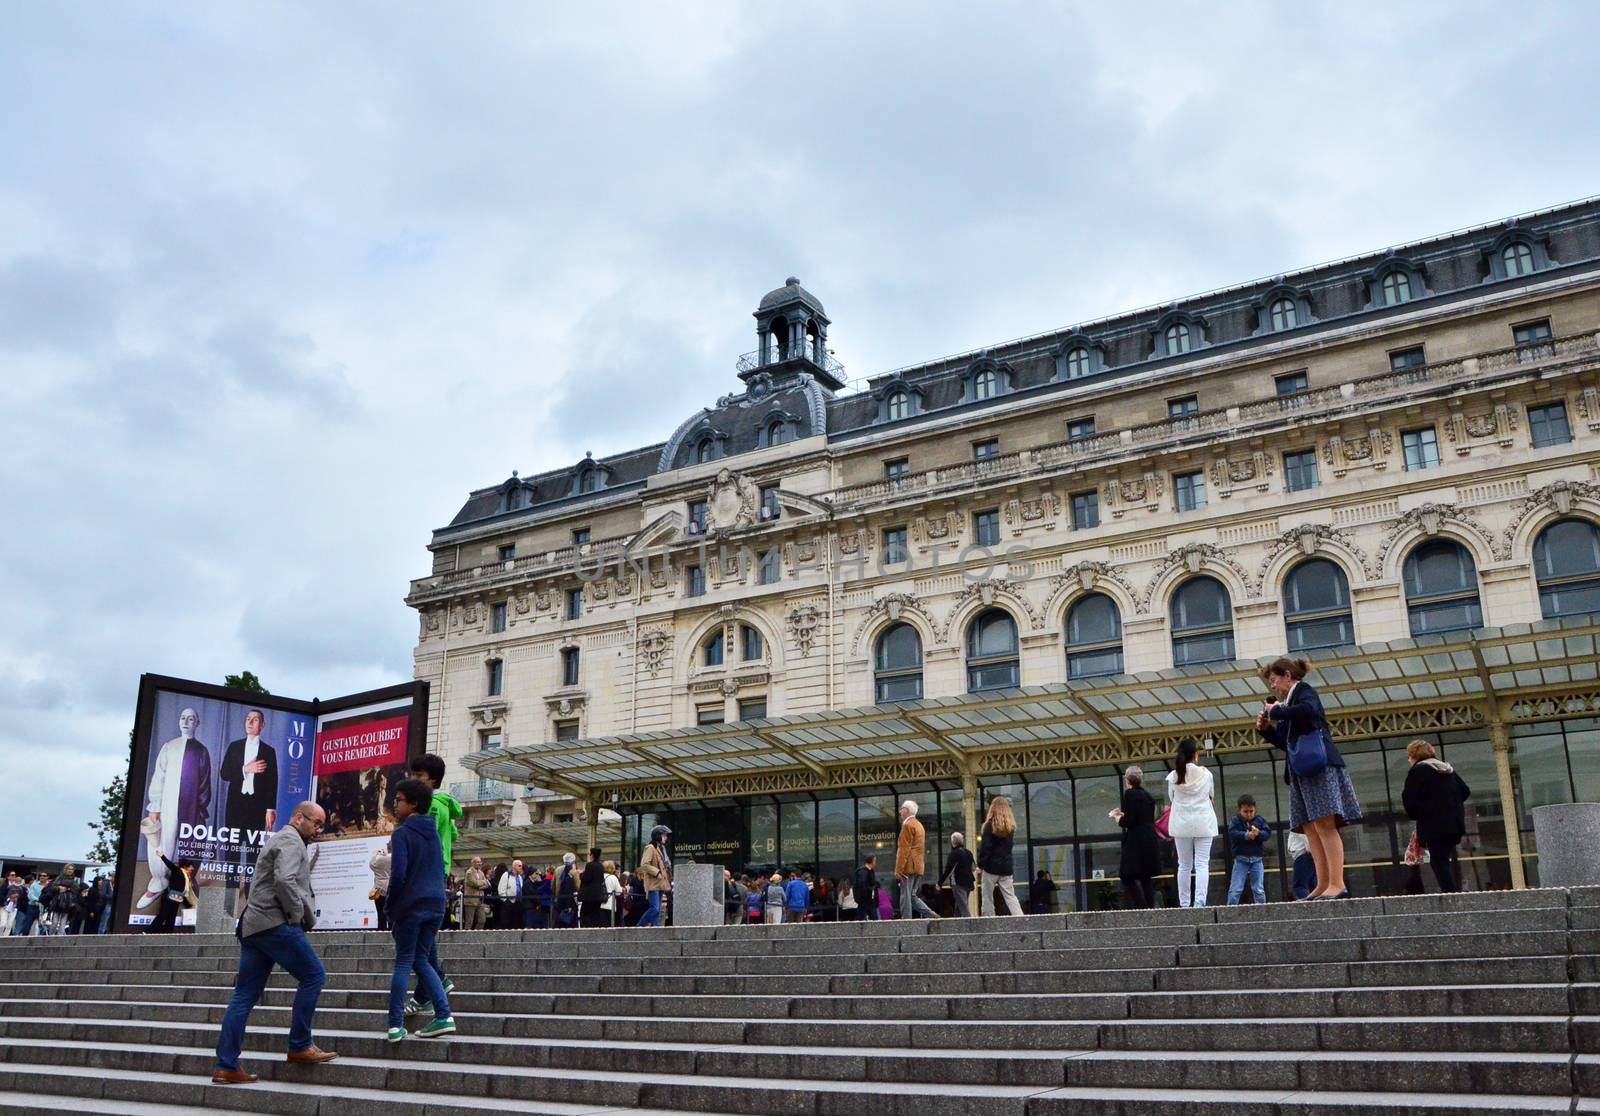 Paris, France - May 14, 2015: Visitors at the Main entrance to the Orsay modern art Museum in Paris, France.The museum houses the largest collection of impressionist and post-impressionist masterpieces in the world